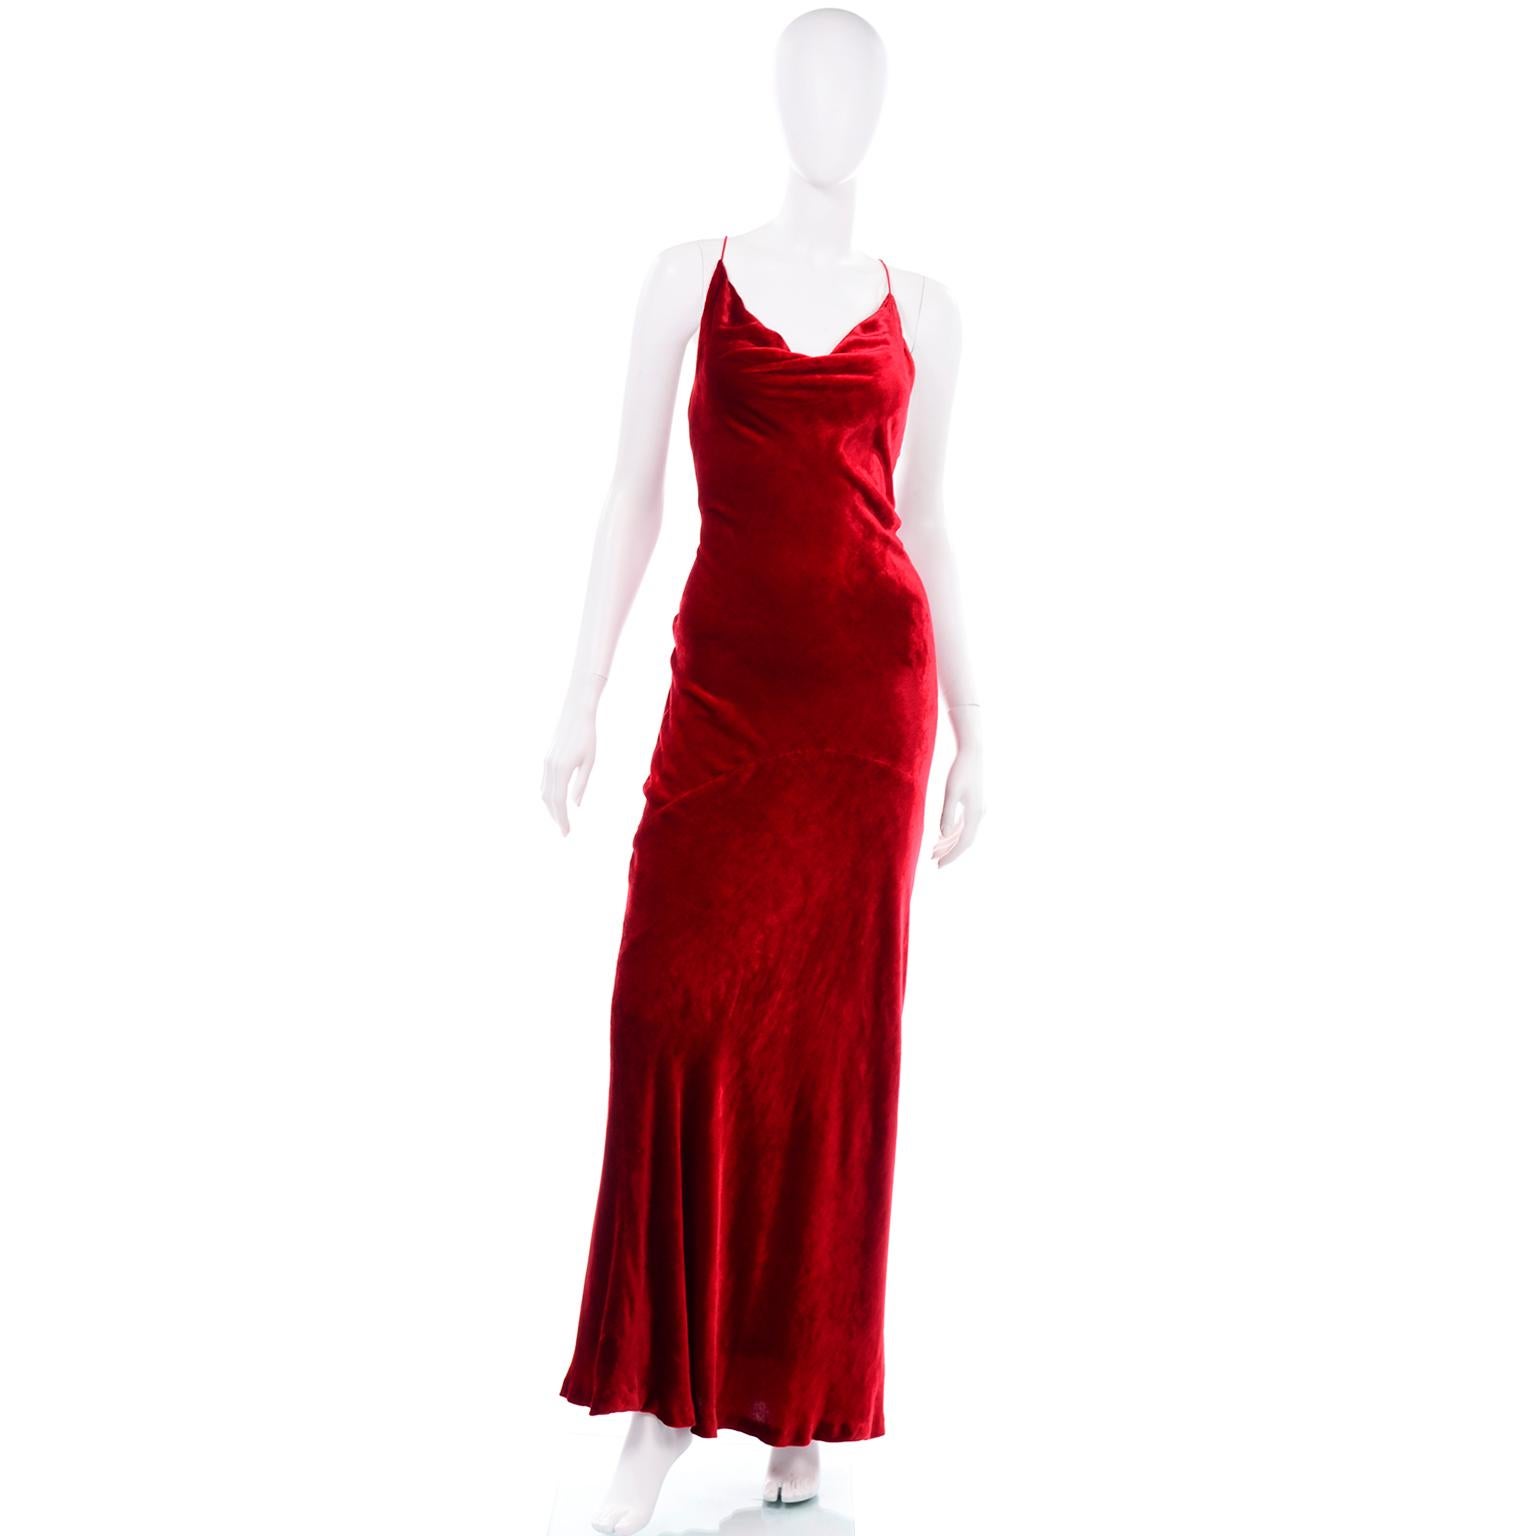 This is an absolutely gorgeous vintage Bill Blass gown from his Fall/Winter 1985 collection. It is red velvet bias cut evening gown with thin spaghetti straps that cross in the back and a nice, draped neckline. This lovely dress has beautiful red